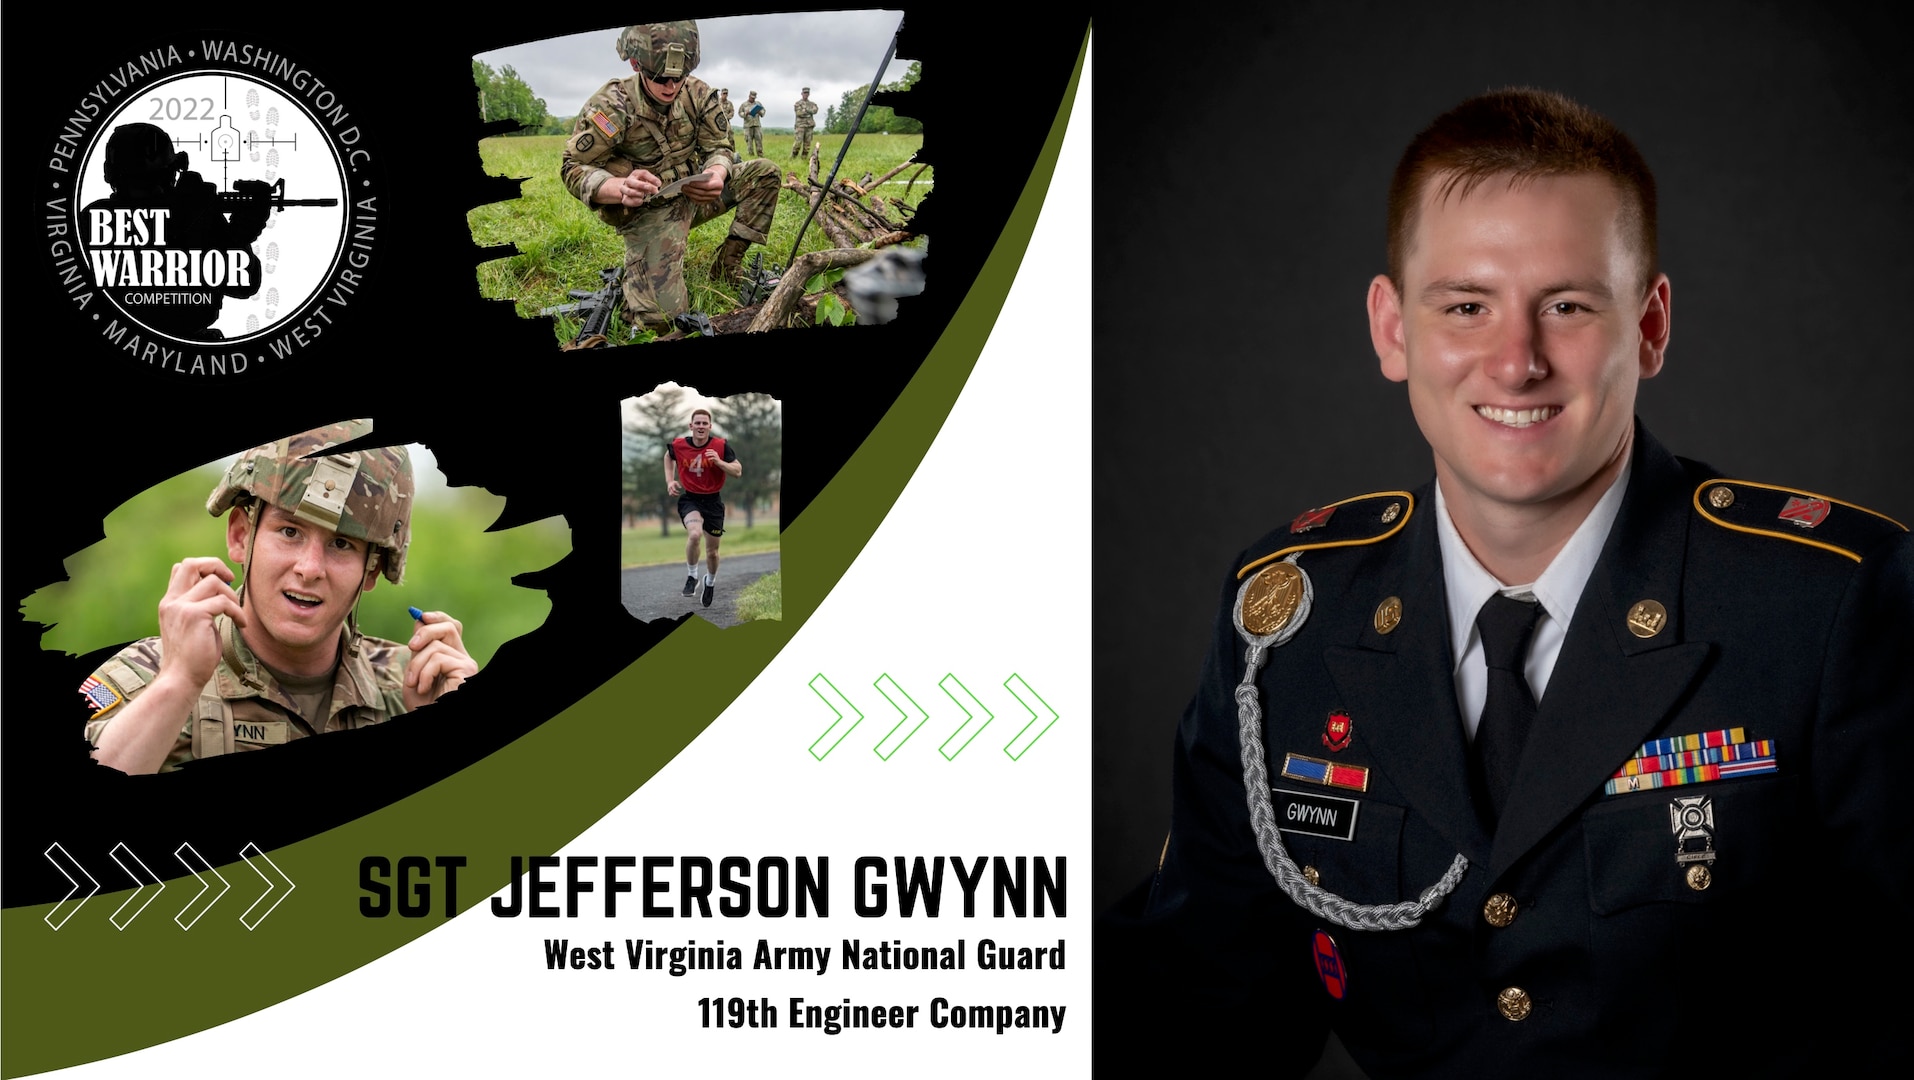 Sgt. Jefferson Gwynn, a combat engineer with the 119th Sapper Company, will represent West Virginia at the national-level Best Warrior Competition to be held in Smyrna, Tennessee, July 22-29, 2022. Gwynn earned the opportunity to compete against the best the National Guard has to offer from around the nation after being named the Non-Commissioned Officer (NCO) of the Year at the Region II Best Warrior Competition, held at Camp Dawson, West Virginia, in May. (U.S. Army National Guard graphic by Edwin L. Wriston)